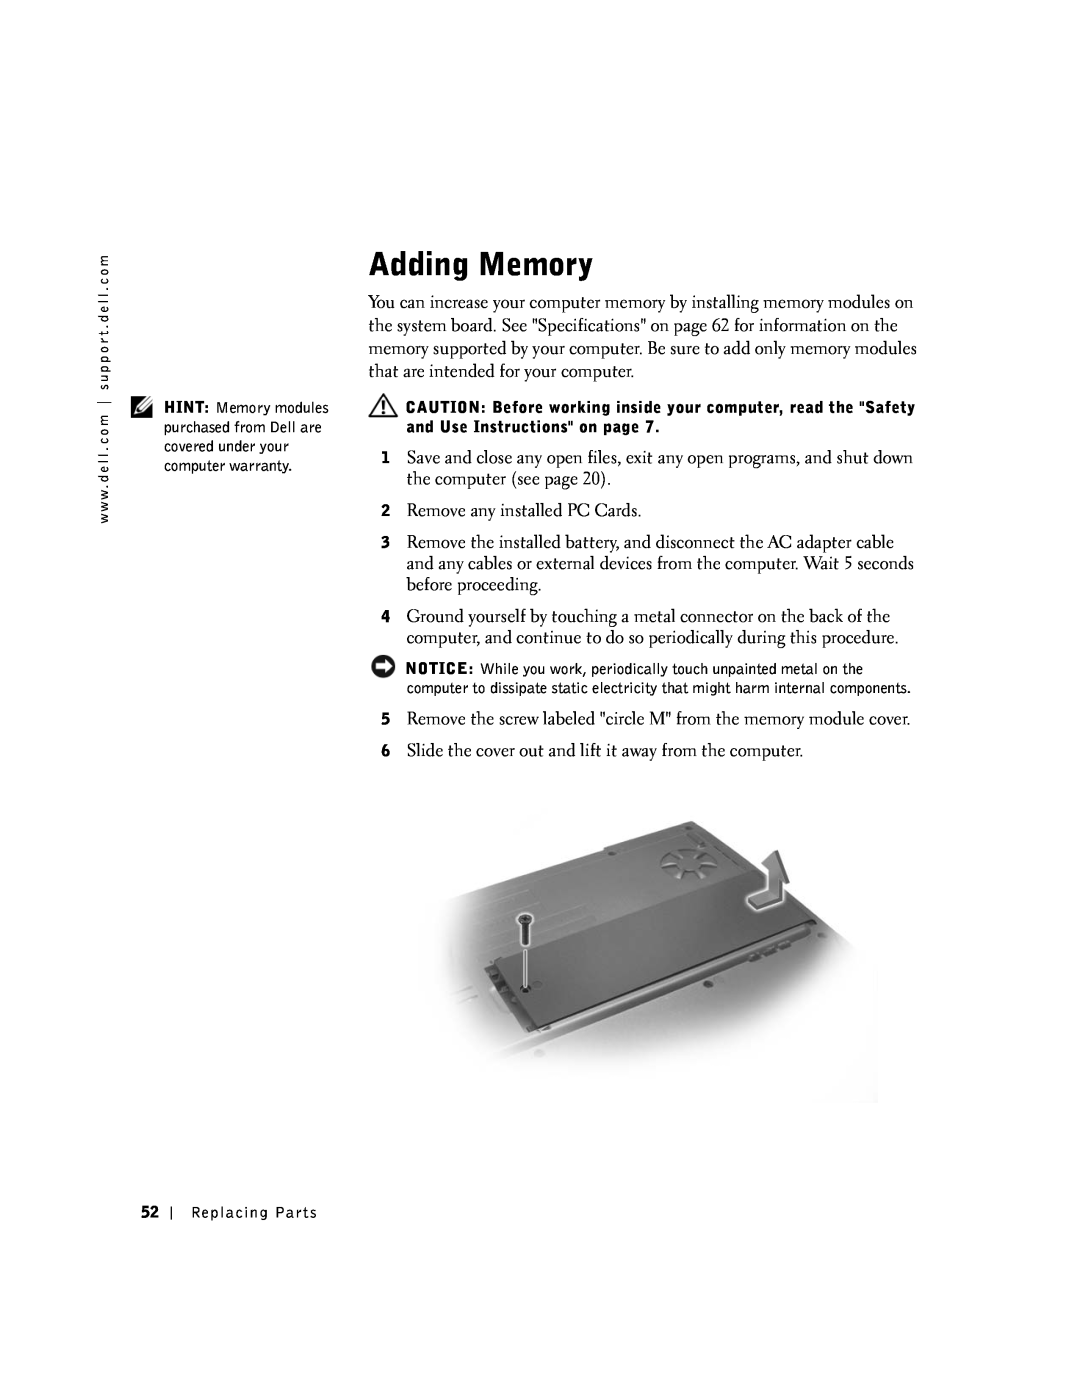 Dell 100N owner manual Adding Memory, Replacing Parts 